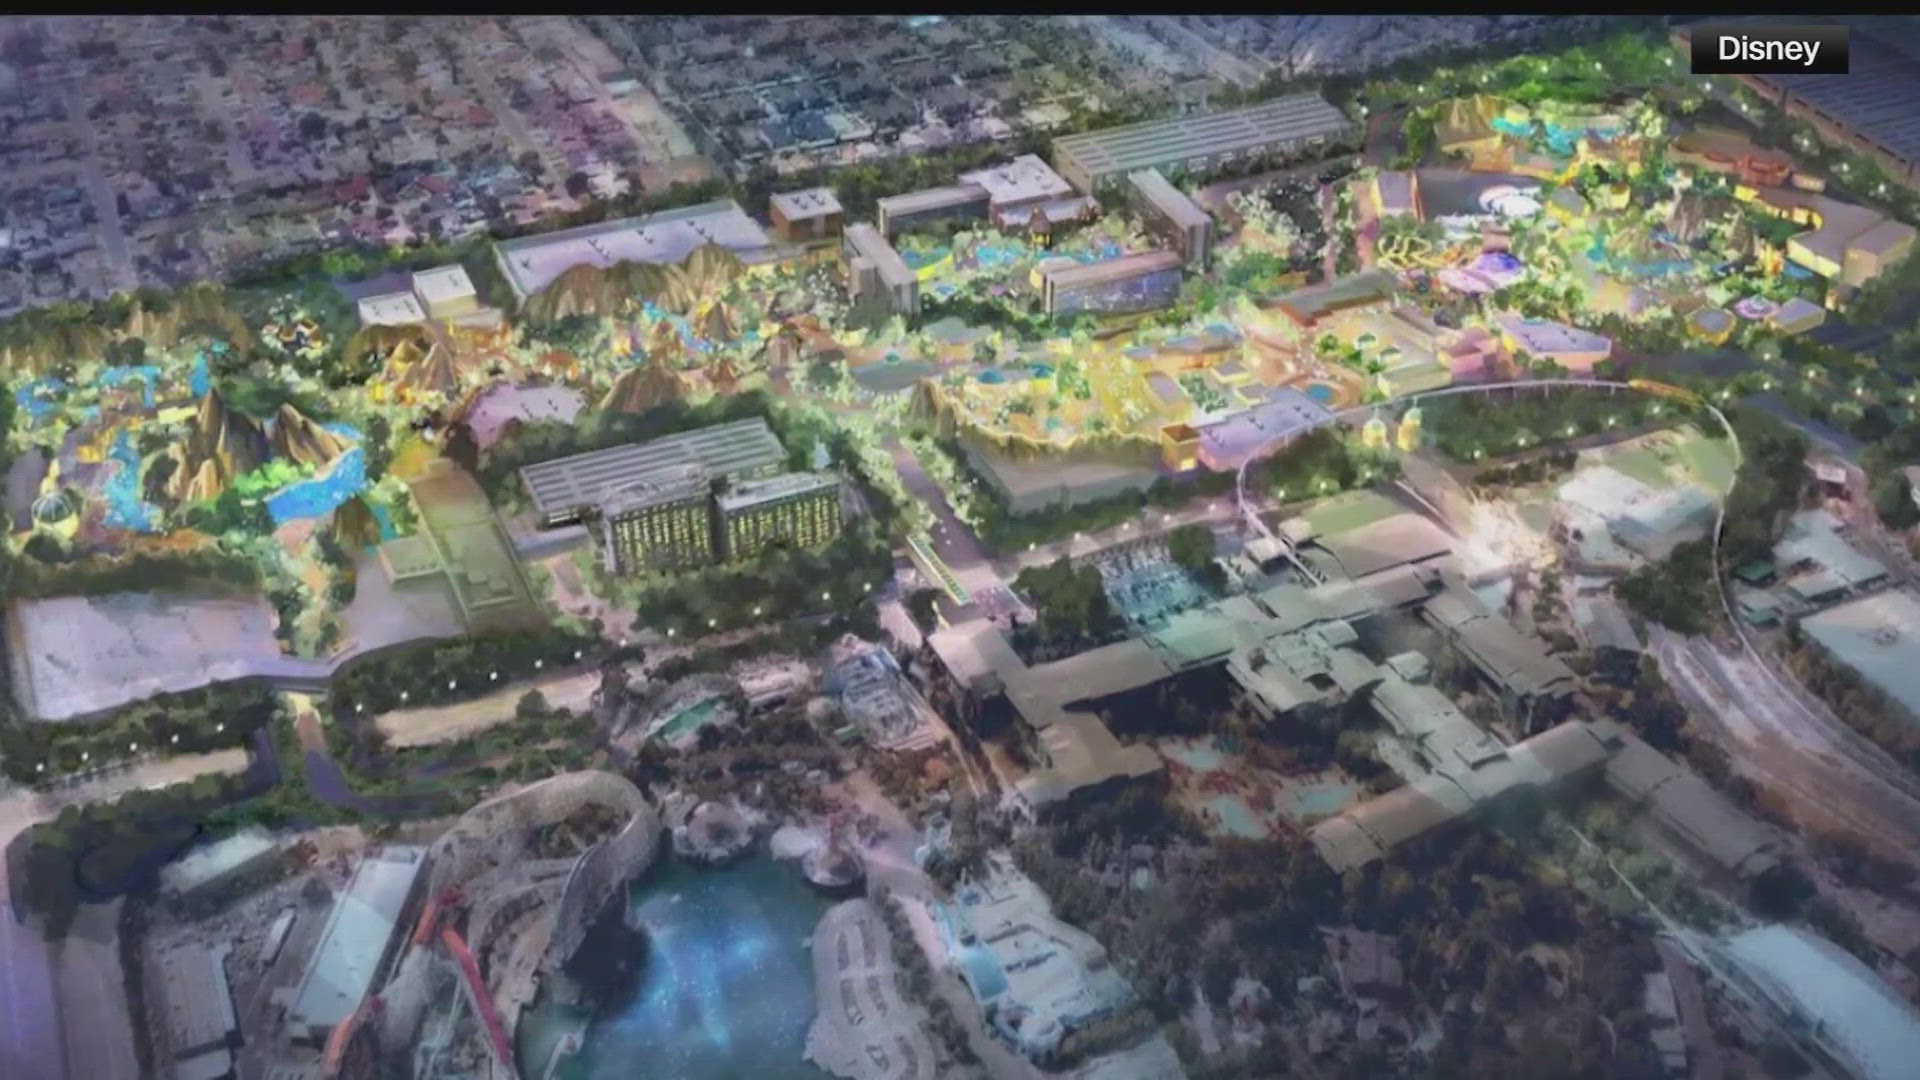 Disneyland has received approval to revamp the California theme park.